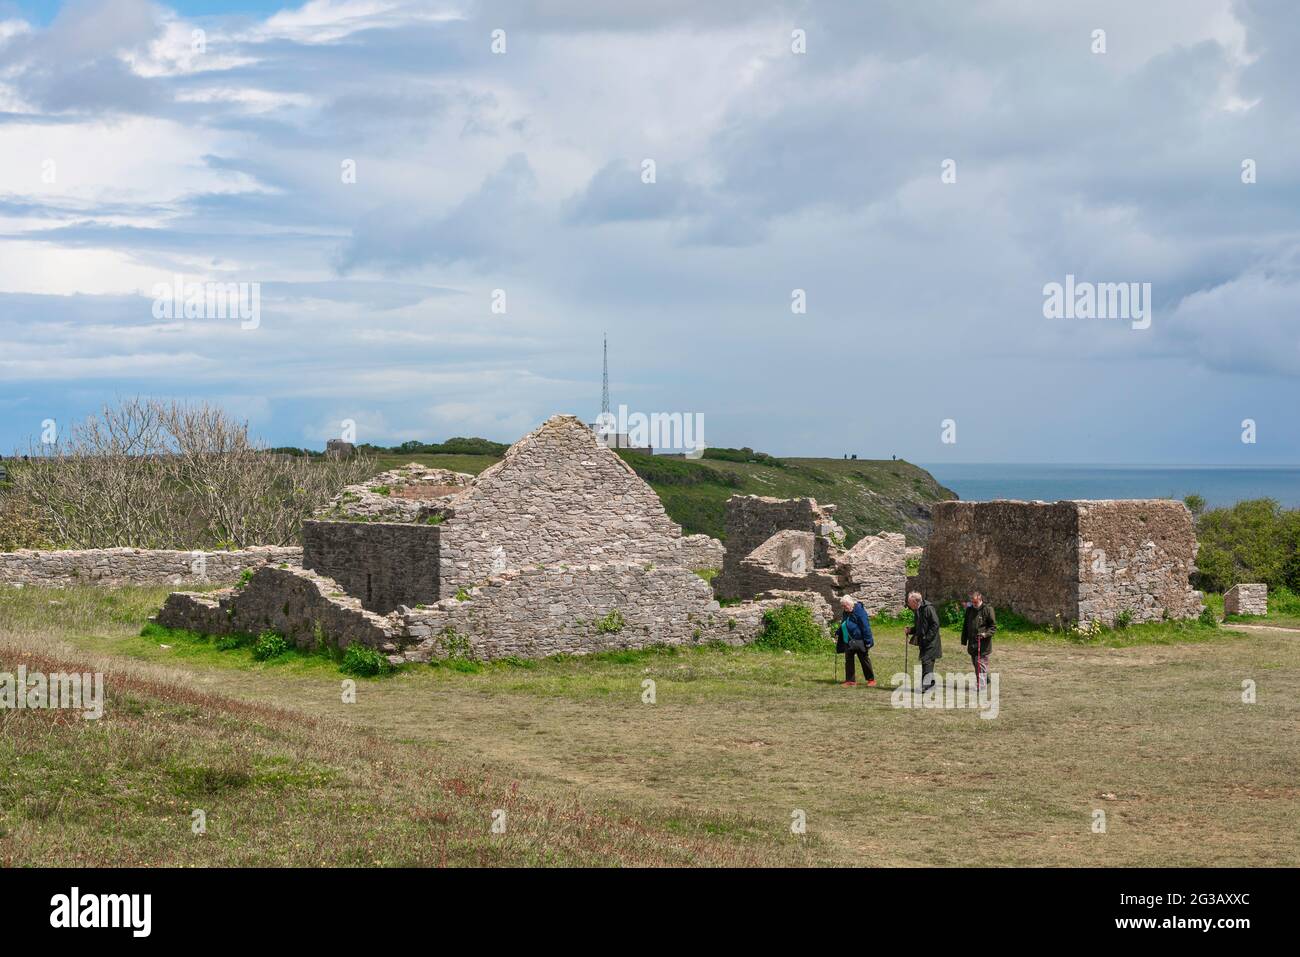 Senior people walking, view of three elderly friends walking in the ruins of the Southern Fort at Berry Head in Torbay, Devon, England, UK Stock Photo